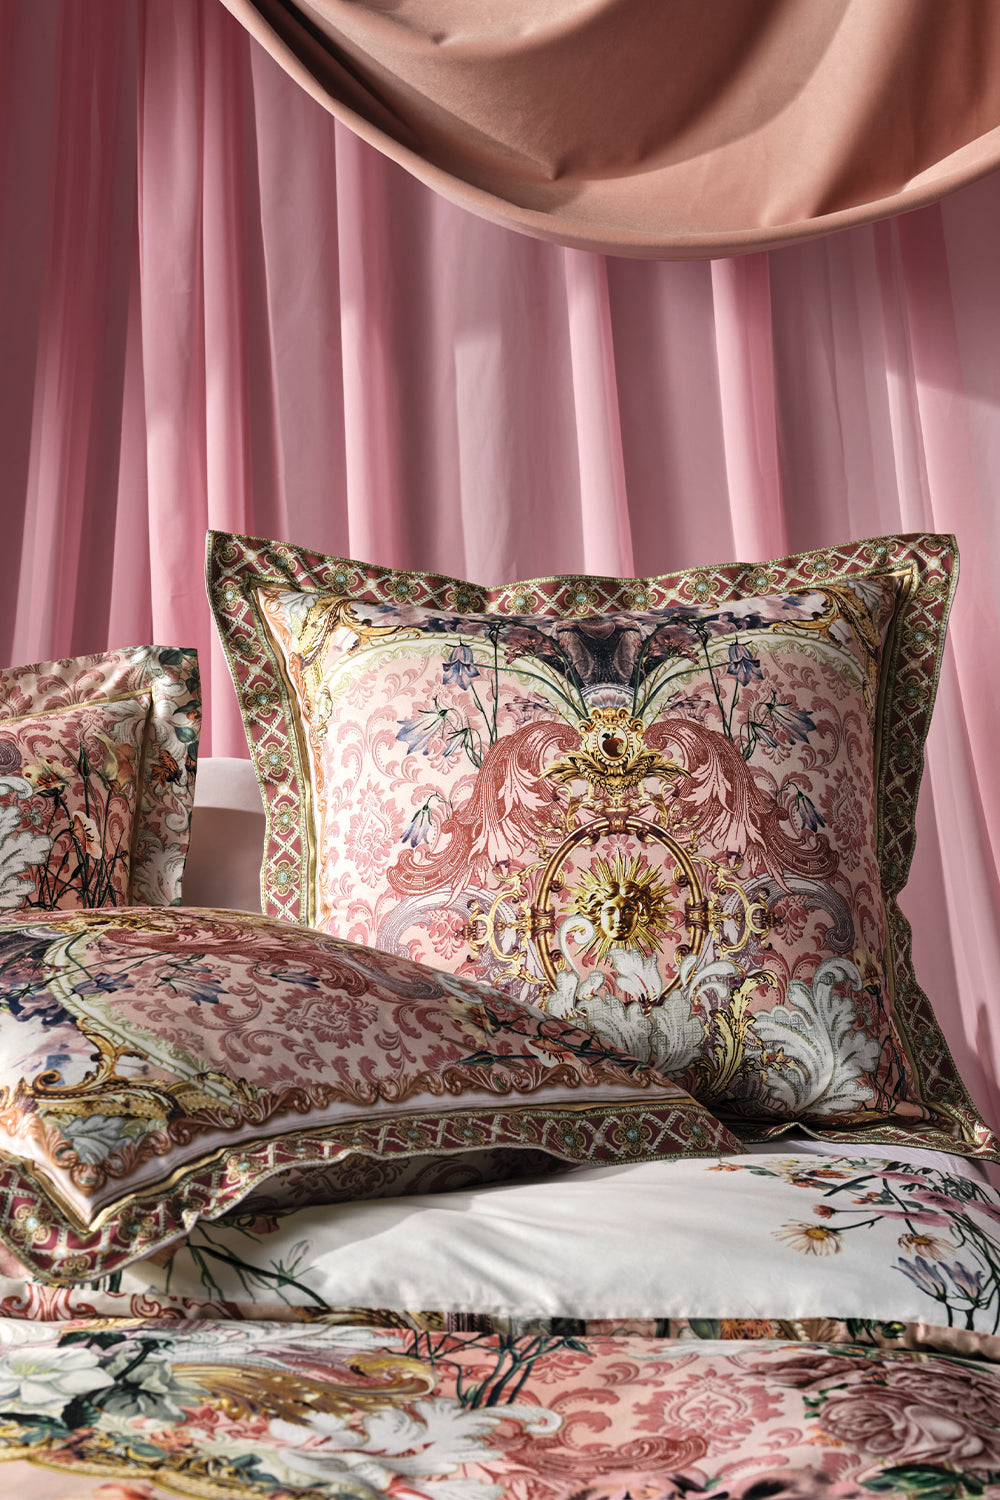 Product view of CAMILLA floral european pillowcase in Kissed By The Prince print